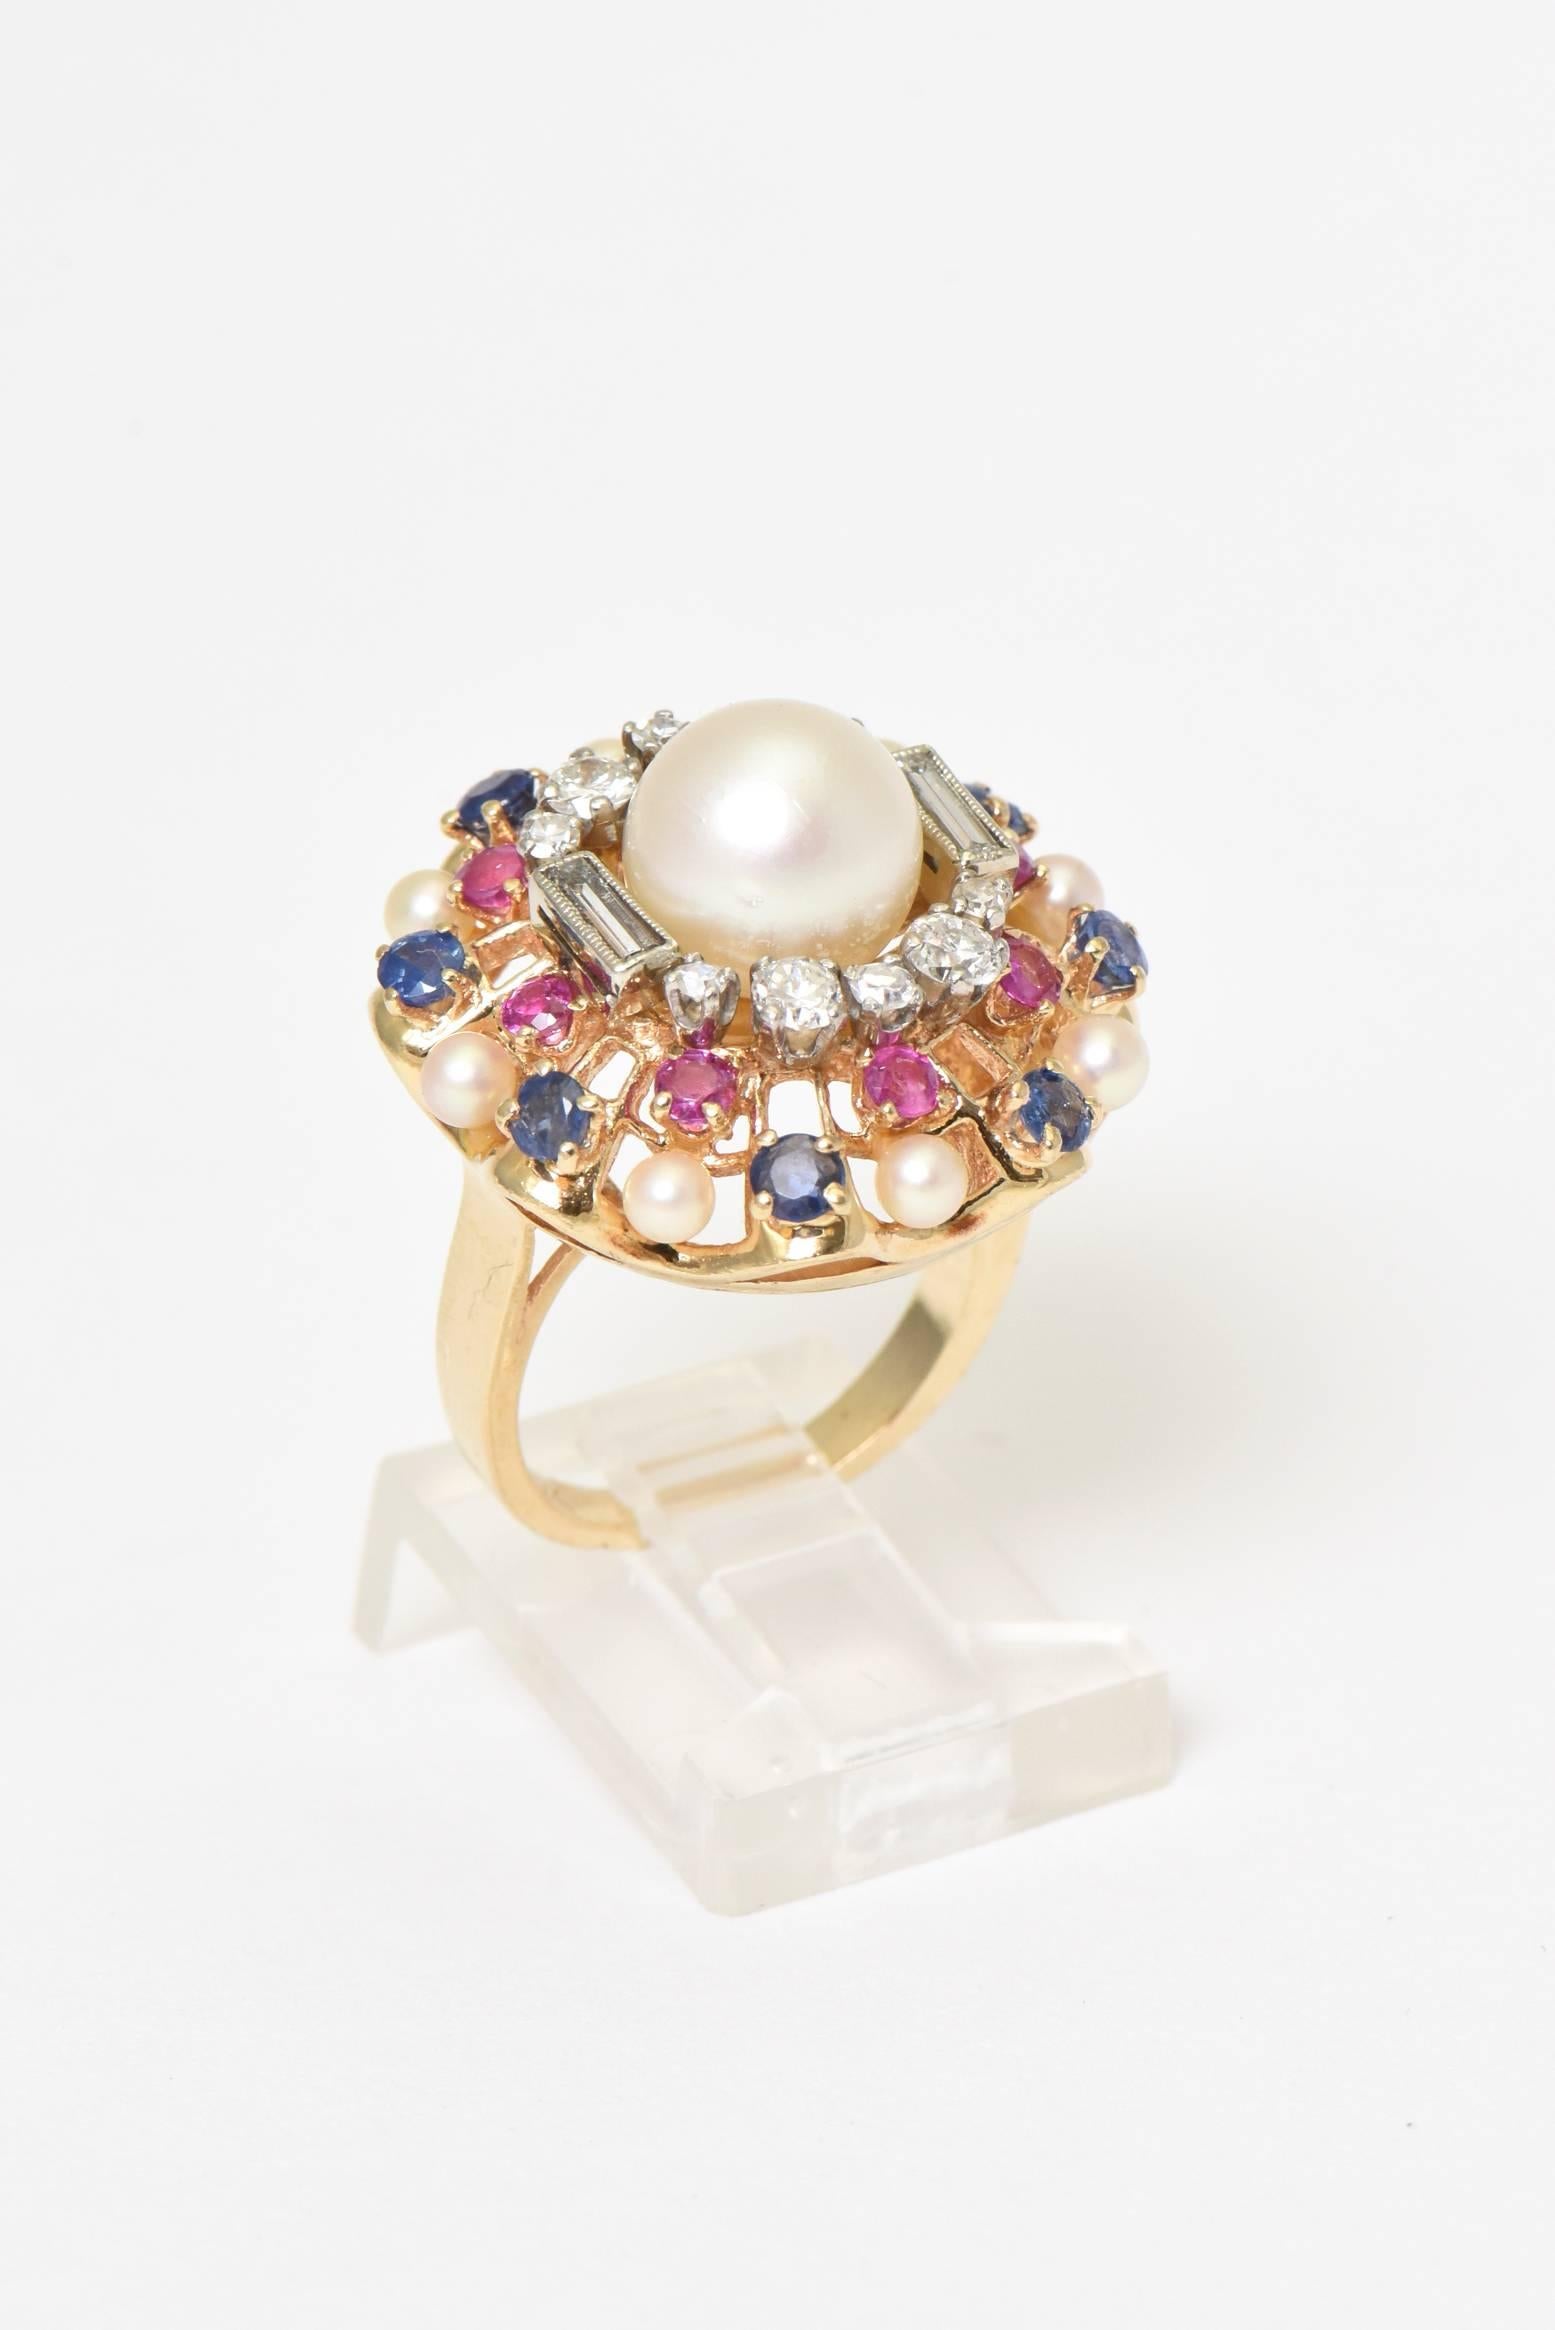 Finely made 14k yellow gold cocktail ring featuring a 8.92mm cultured pearl centrally set in a round and baguette white gold diamond frame within a scalloped frame of rubies, sapphires and tiny pearls.
Marked 14k
Ring Size: 5